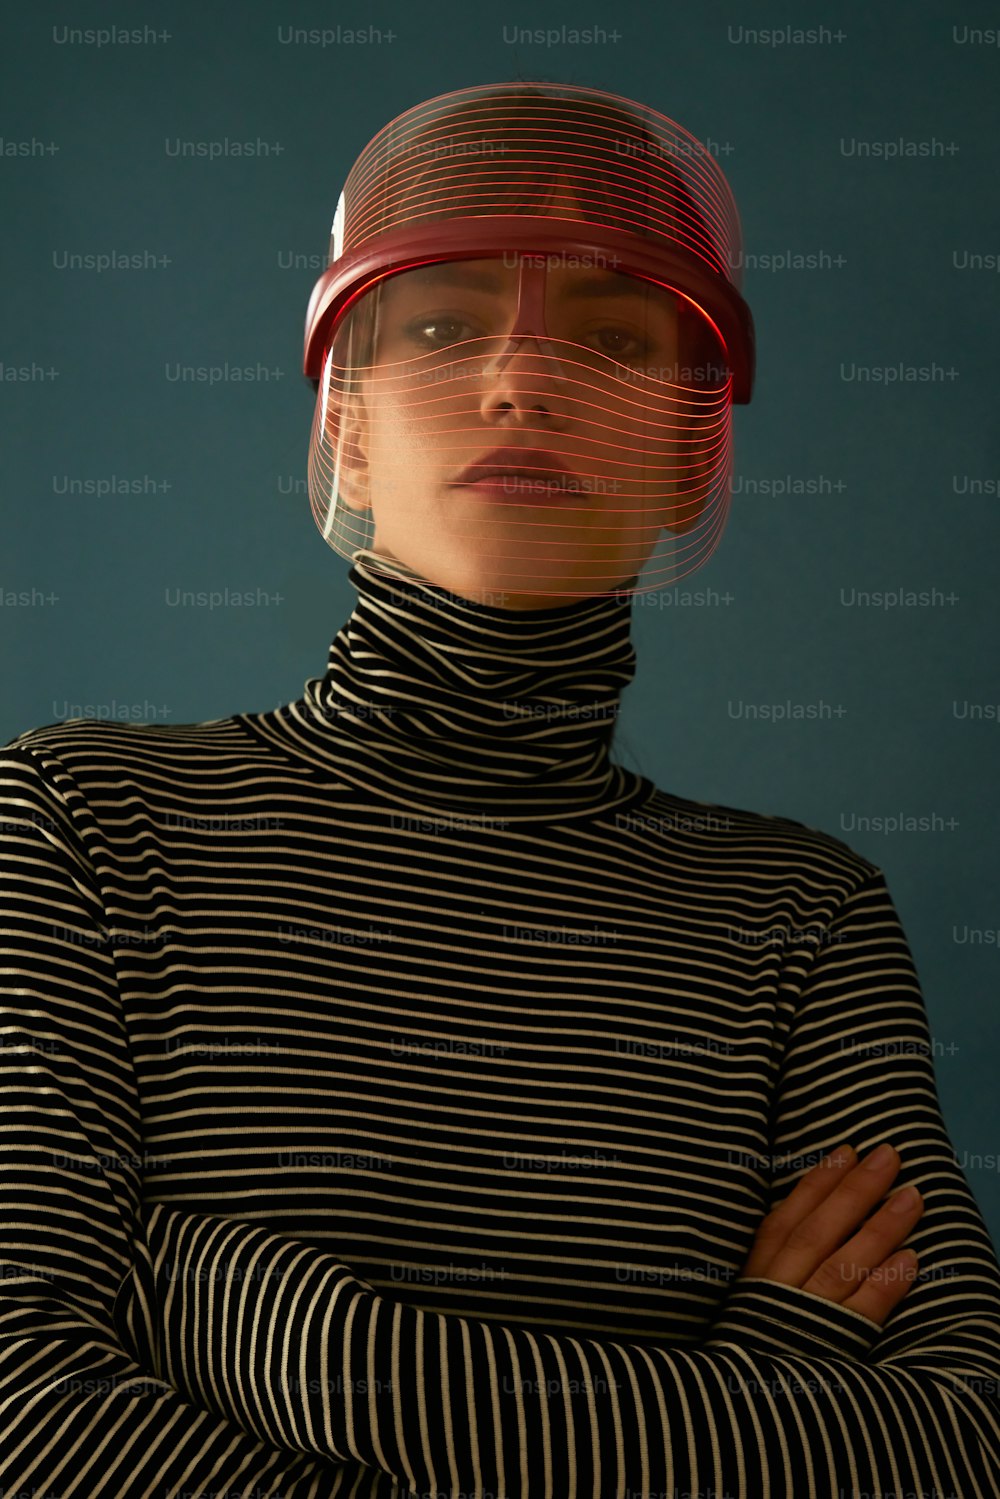 a woman in a black and white striped shirt with a red helmet on her head